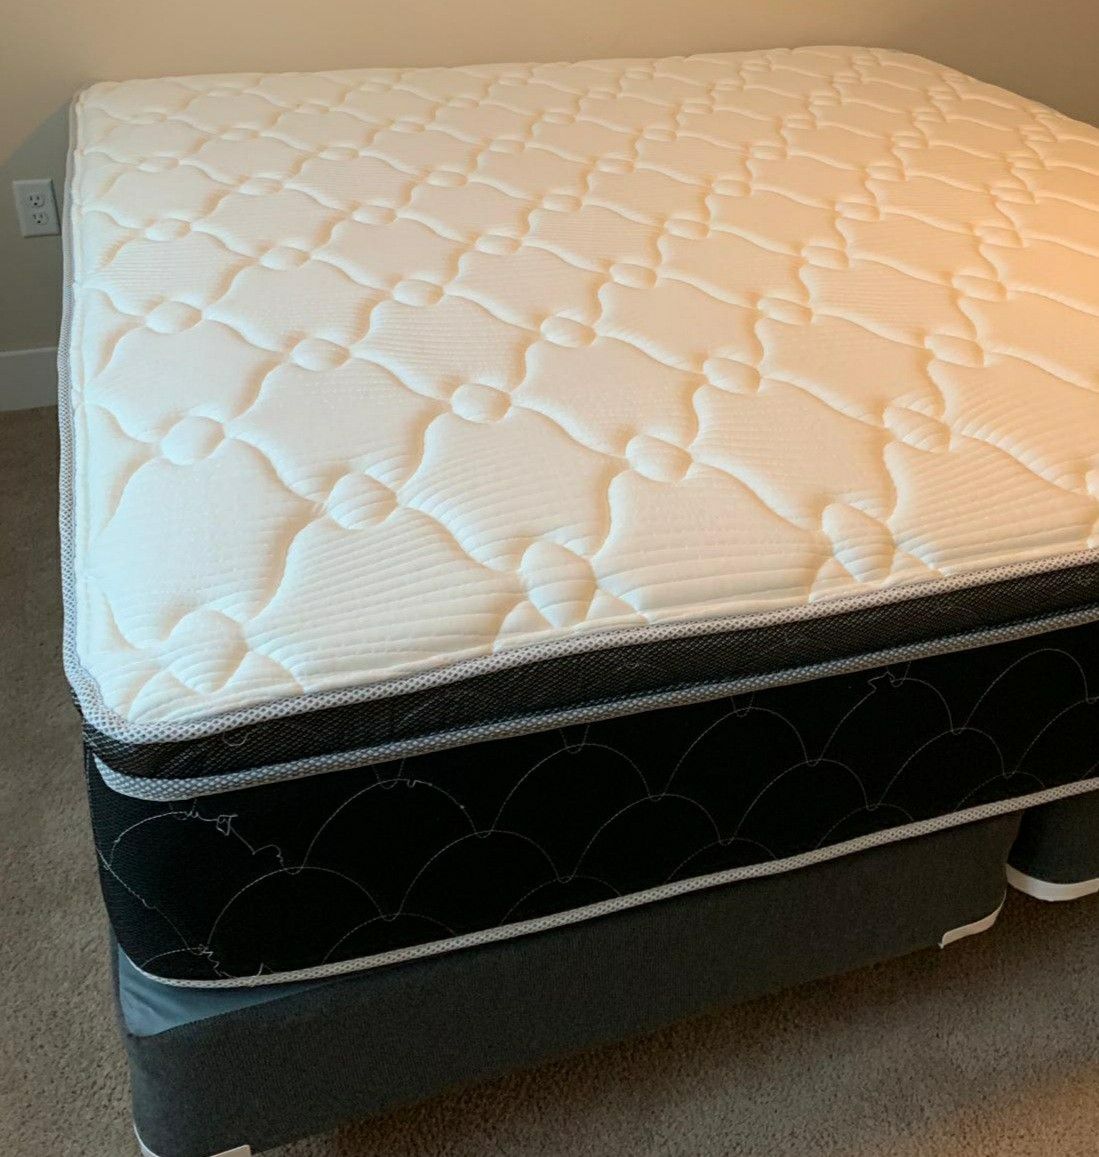 NEW KING MATTRESS PILLOWTOP AND BOX SPRINGS.. bed frame is not included